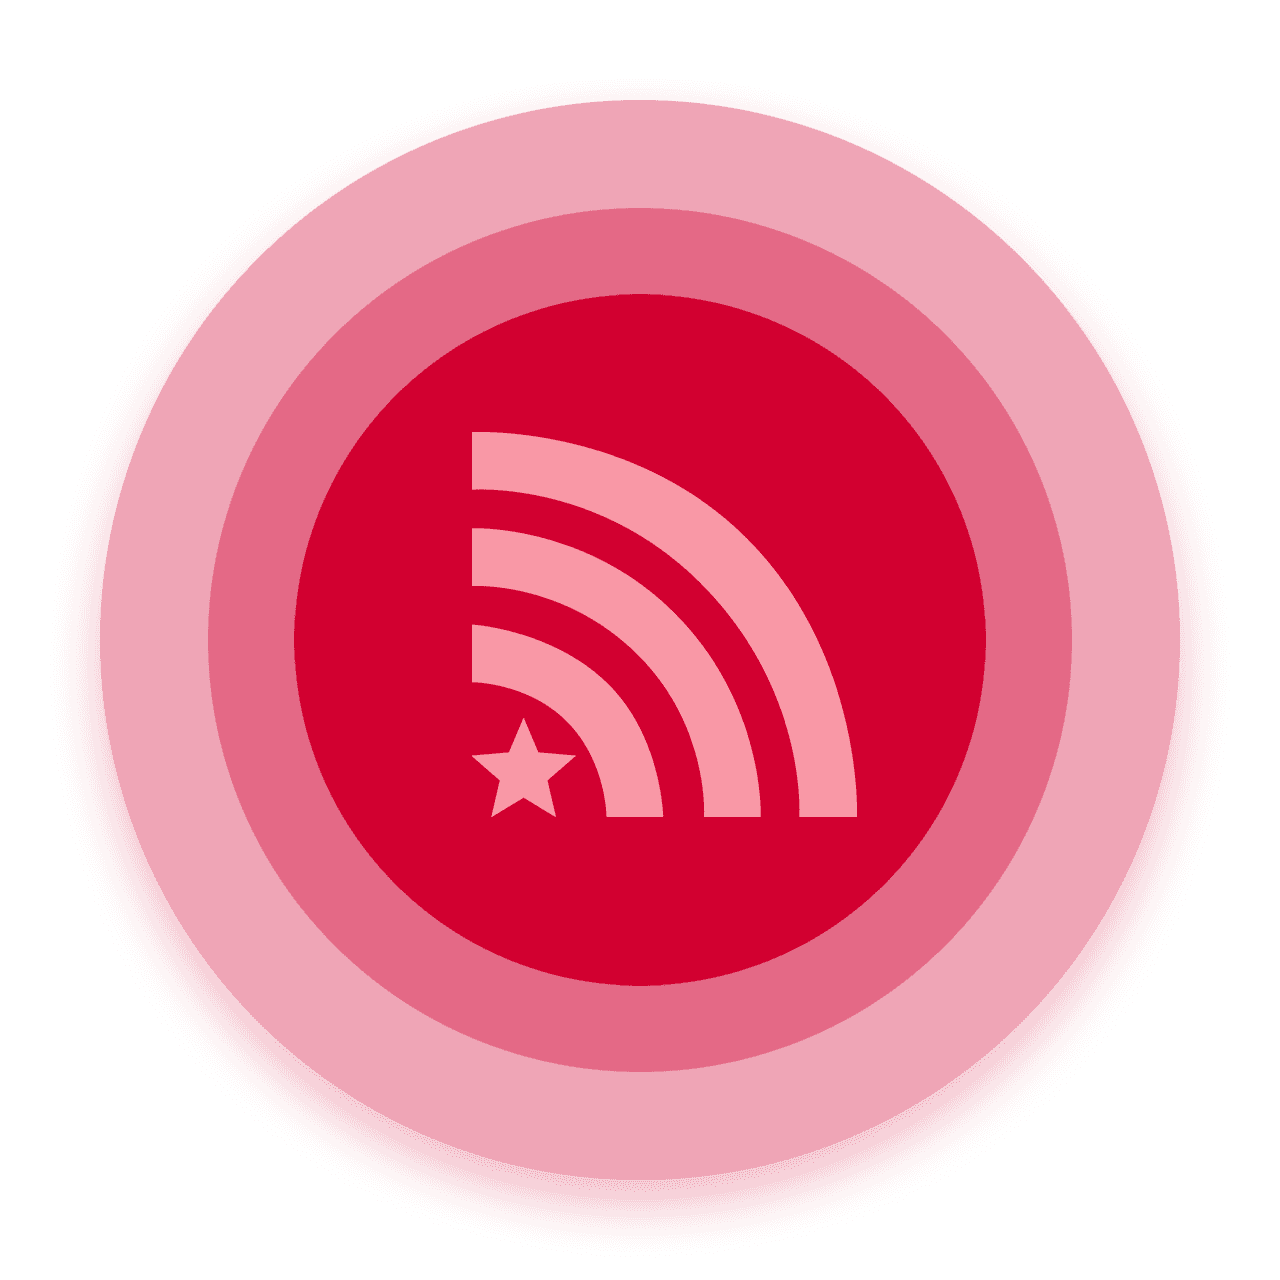 UIGFI04-gigfast-internet-icon-red.png